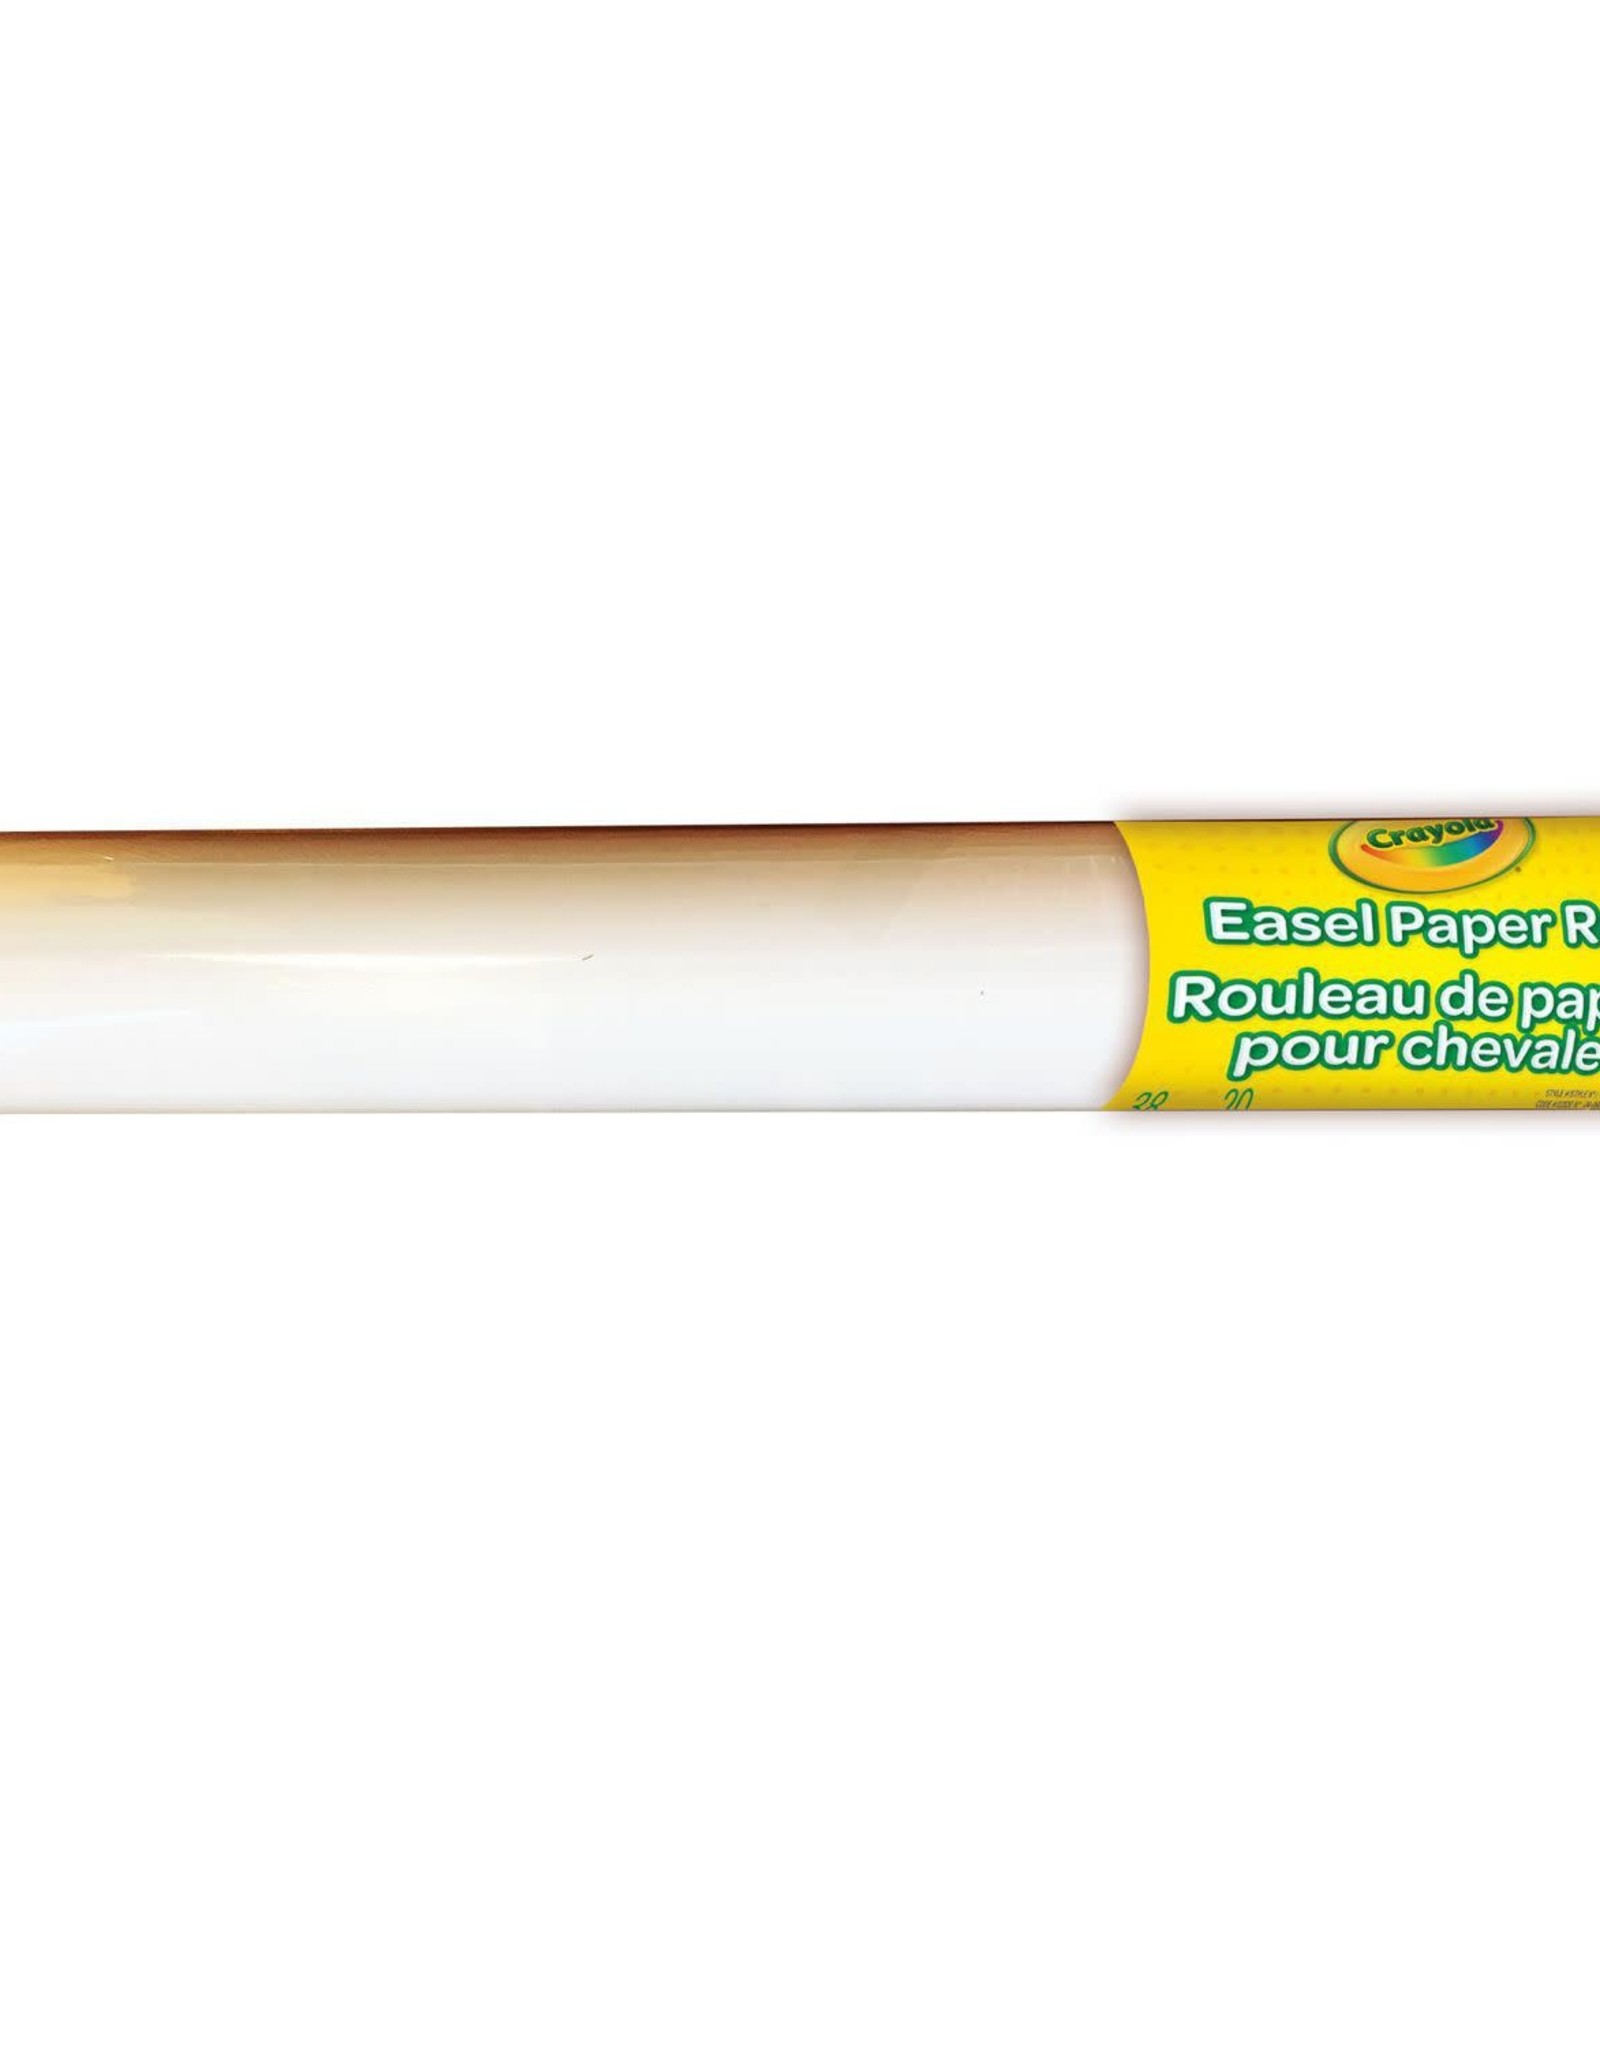 Crayola Easel Paper Roll